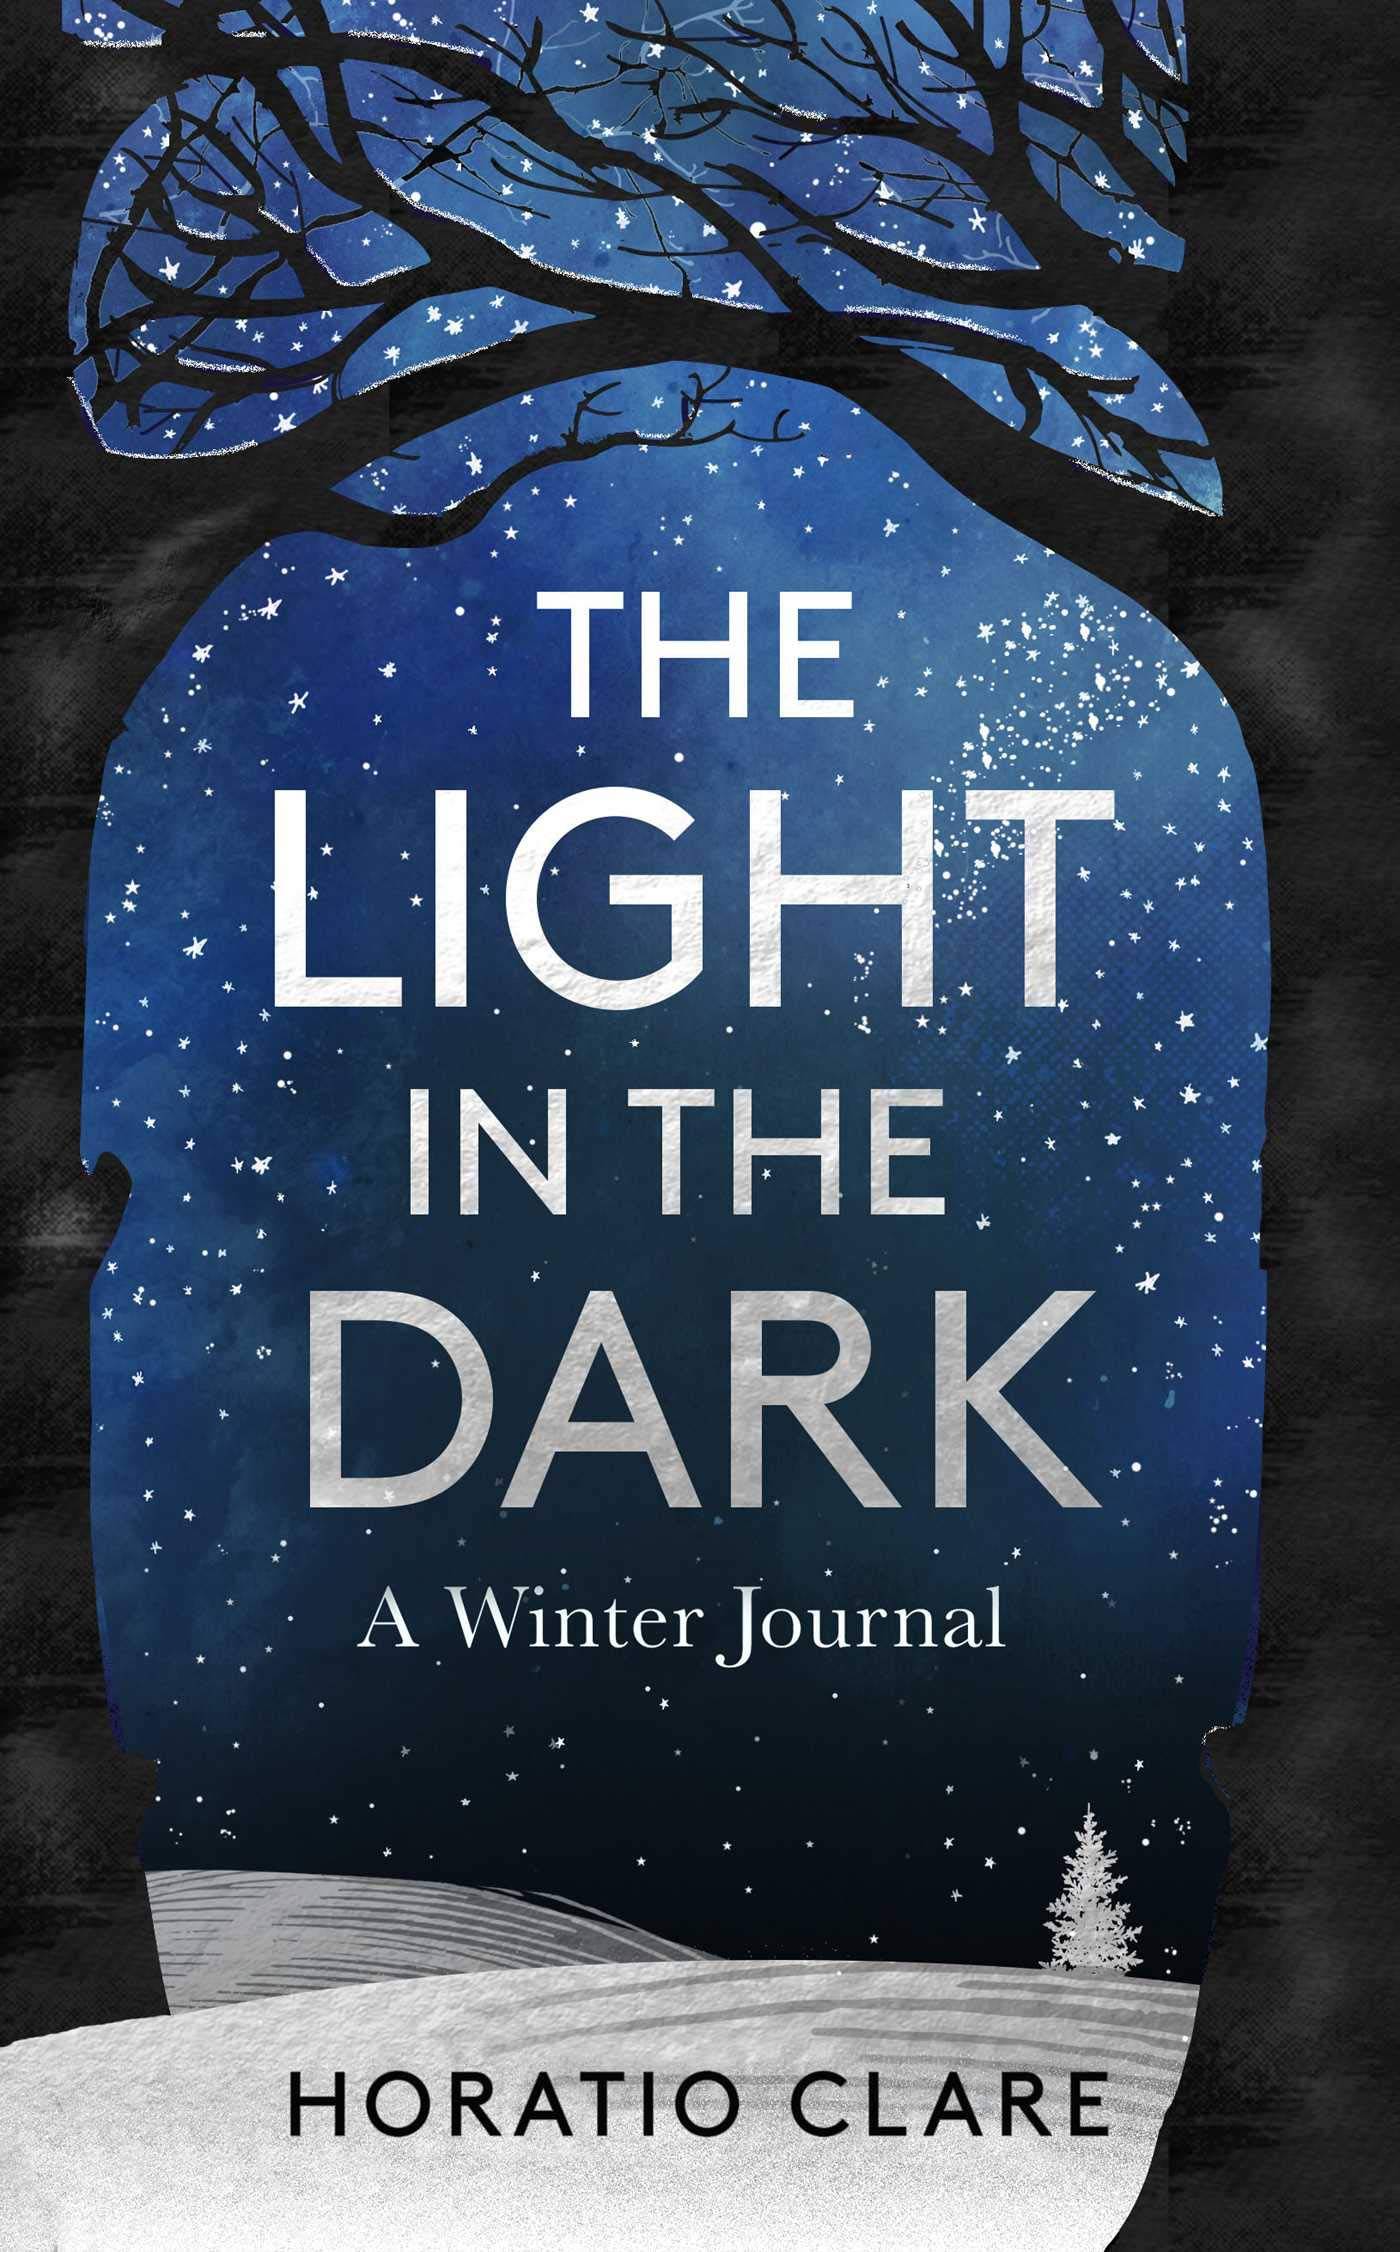 The Light in the Darkness: A winter journal by Horatio Clare